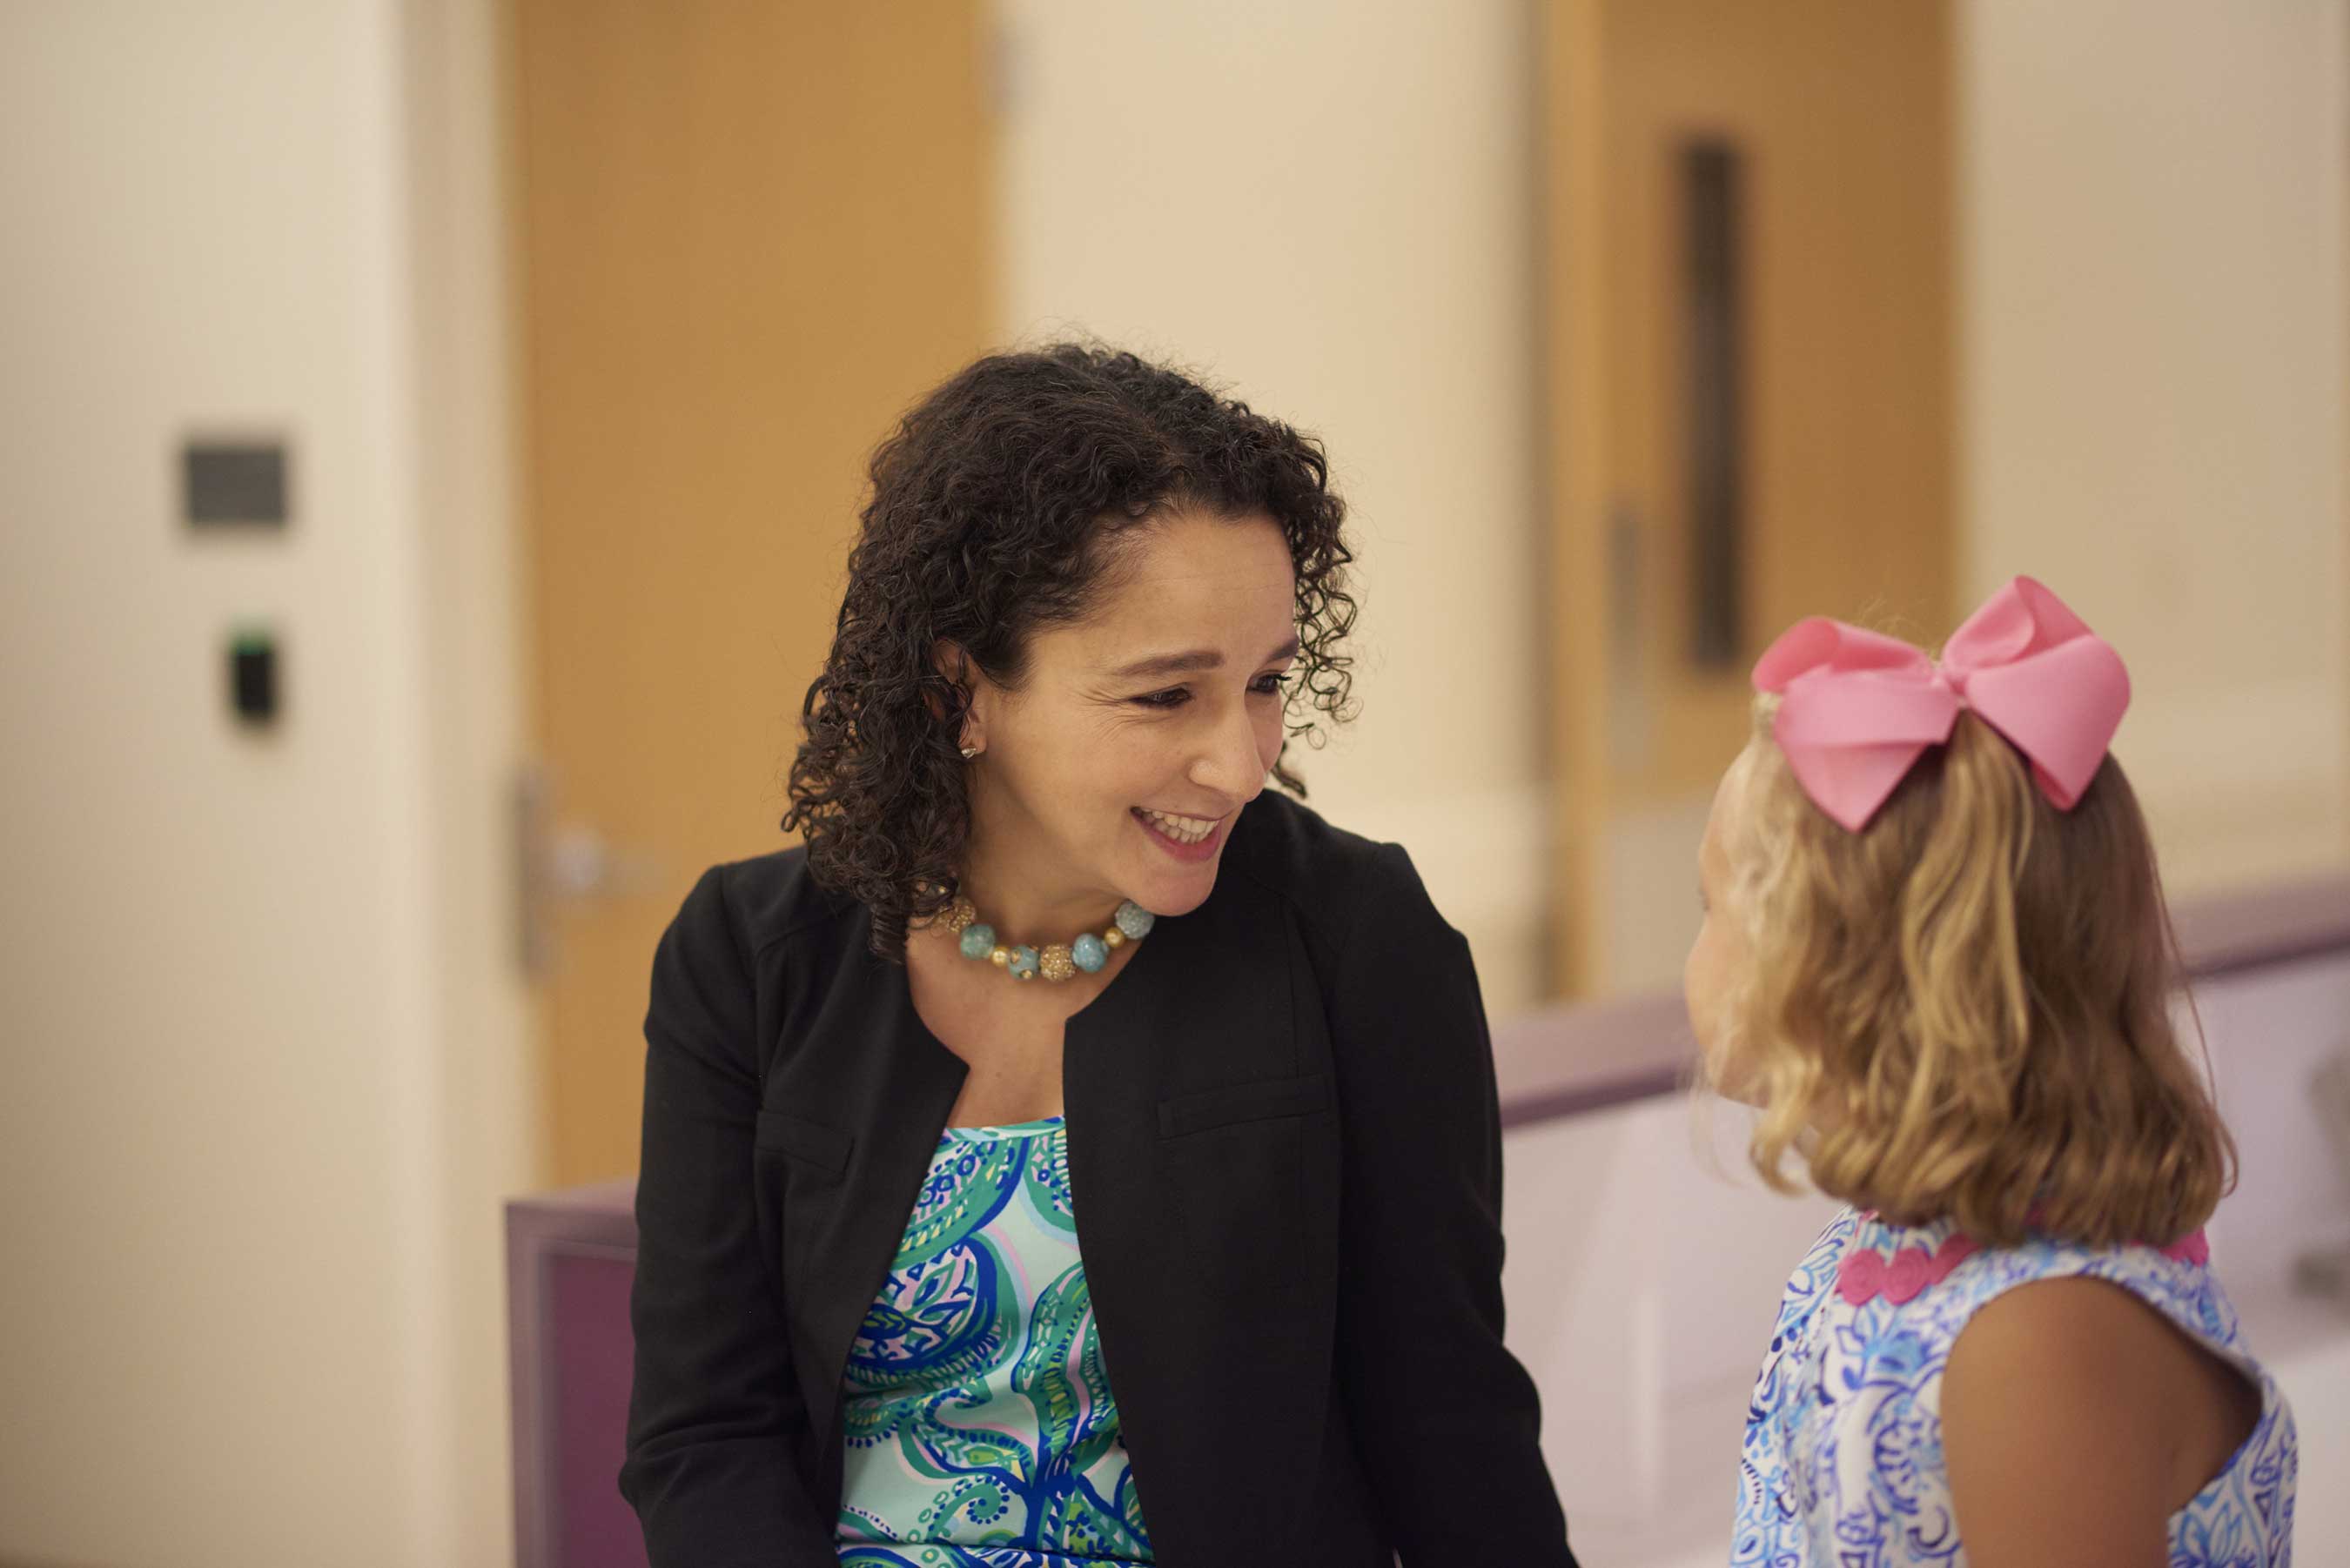 Dr. Yael Mossé and Edie Gilger share a laugh at Children’s Hospital of Philadelphia. Dr. Mossé developed a lifesaving cancer cure for Edie and her mother, and all three will be honored on Northwestern Mutual’s 2017 Rose Parade® float.